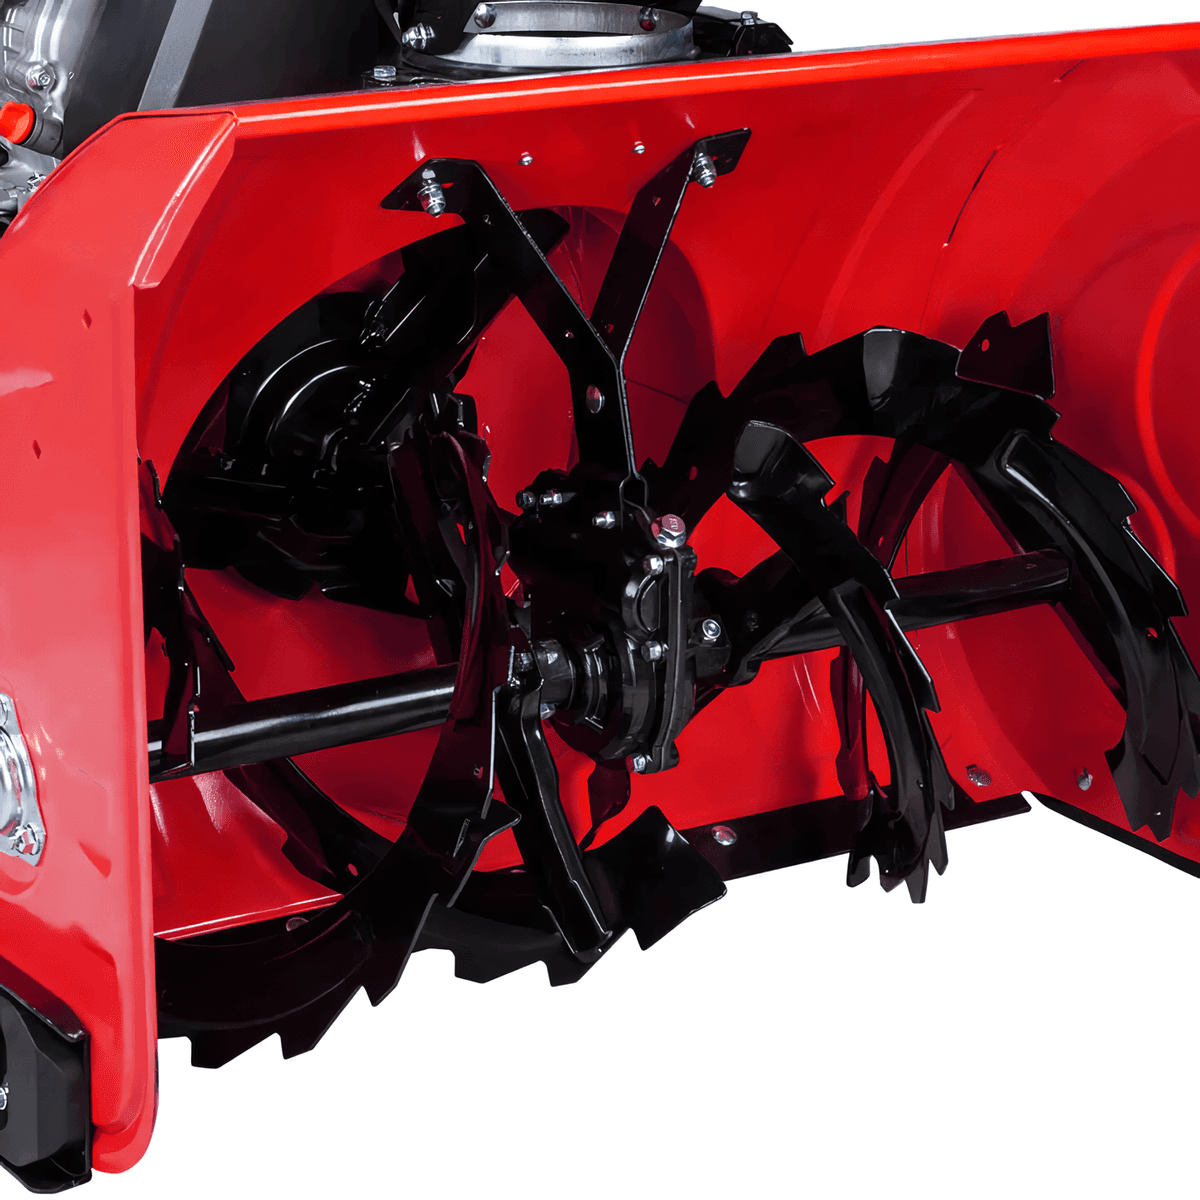 Value Industrial 30” Self-propelled Gas Powered Snow Blower